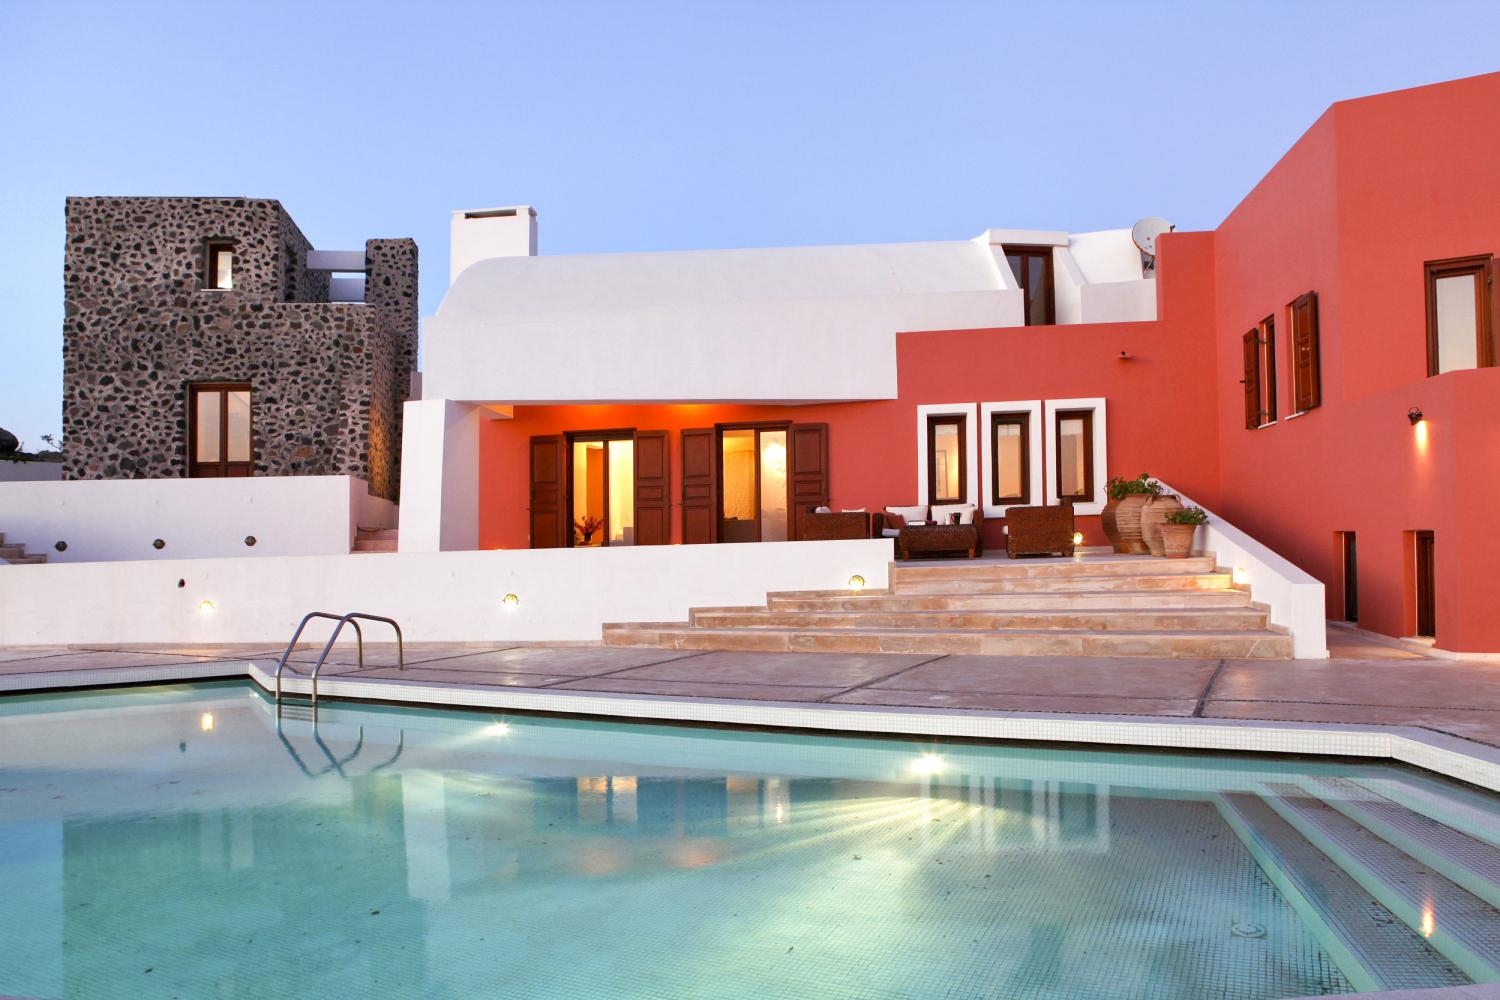 Spectacular villa for rent with panoramic views of the volcano, Santorini, Greece